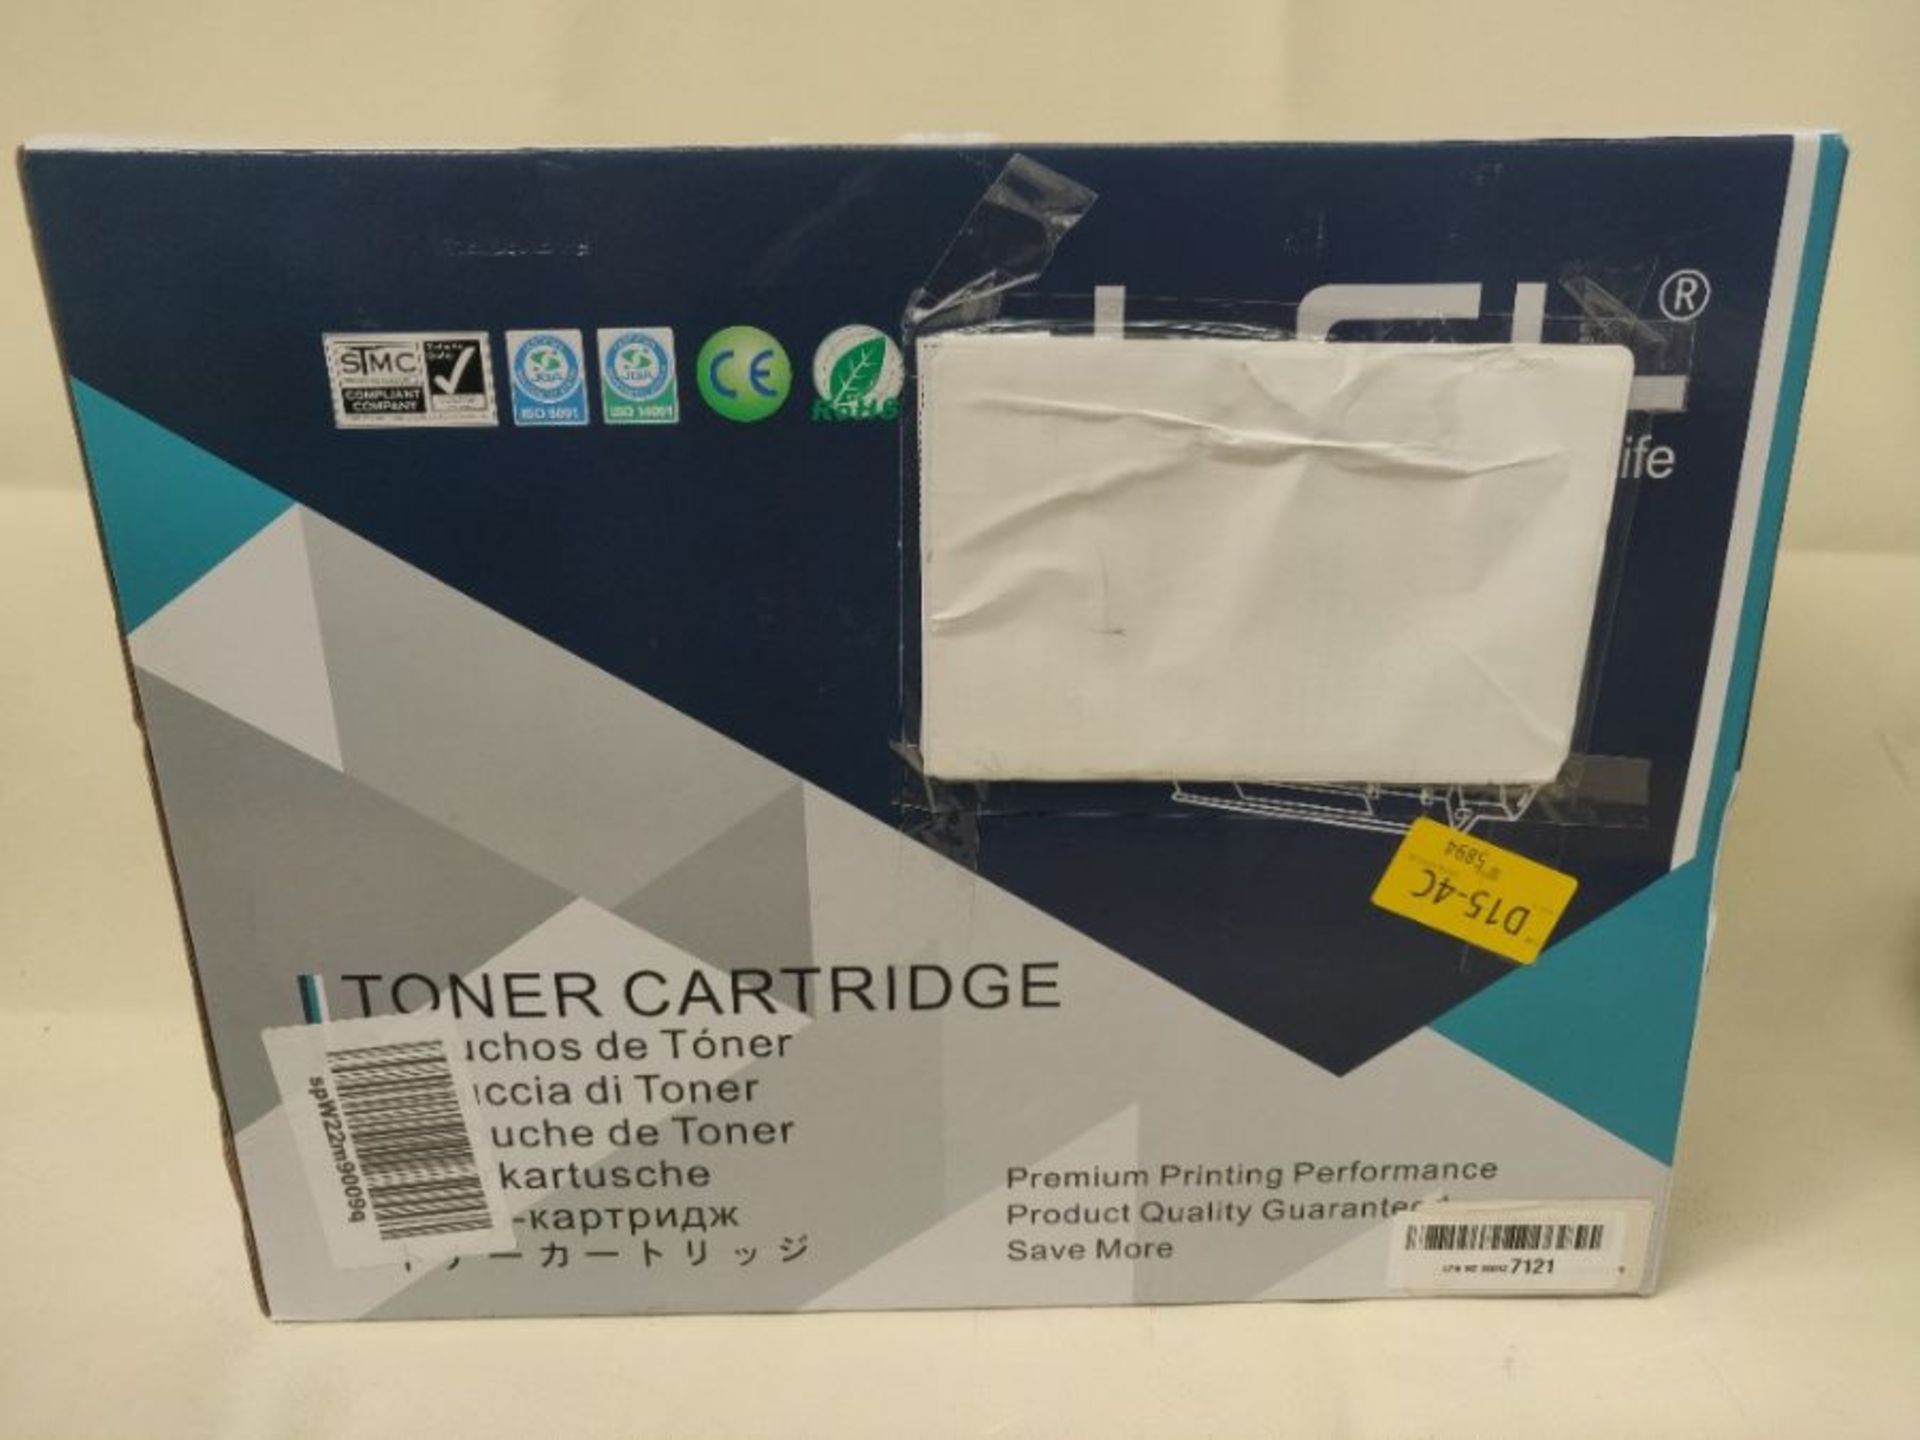 LCL Compatible Toner Cartridge MLT-D203E 10000 pages (1 Black) Replacement for Samsung - Image 2 of 3